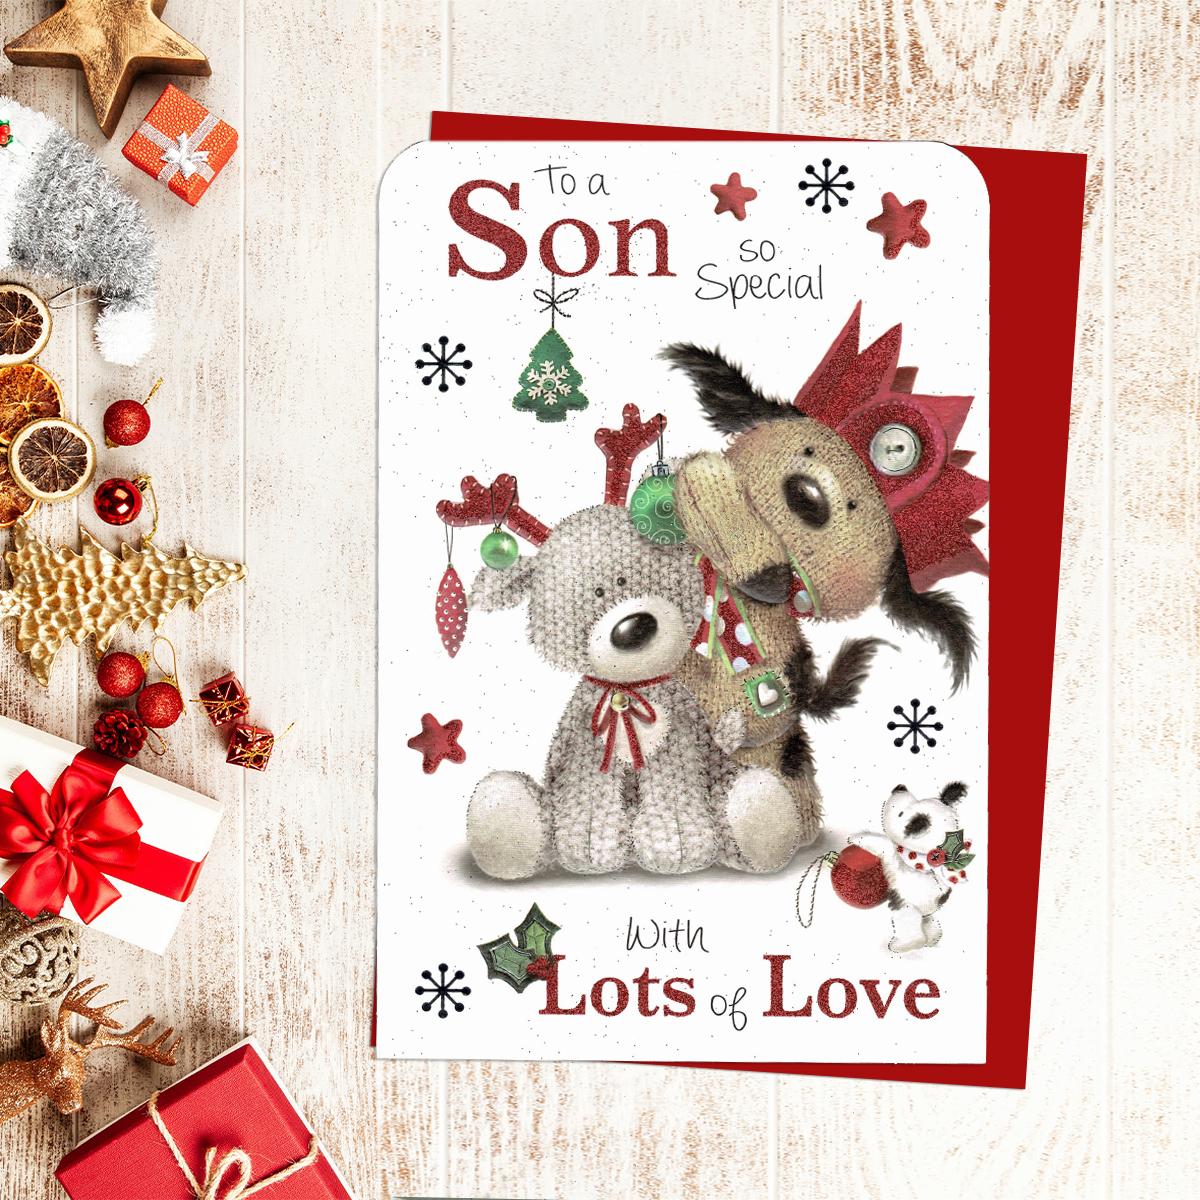 To A Son So Special With Lots Of Love Featuring Two Dogs Decorated With Party Hat And Baubles. Red Glitter Lettering And Red Envelope